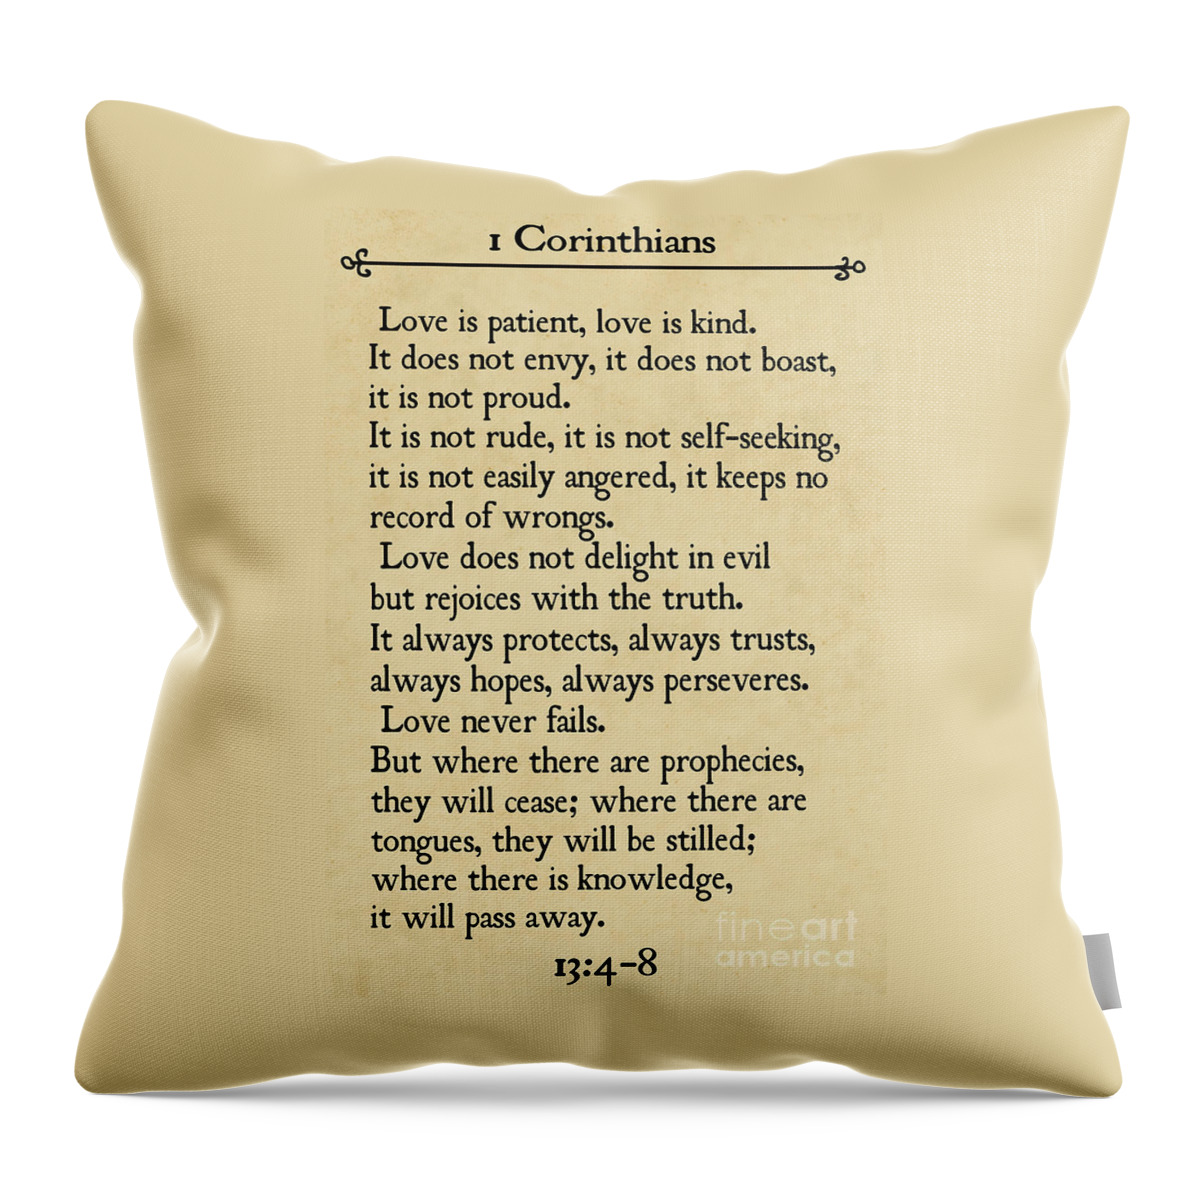 1 Corinthians 13 4-8- Inspirational Quotes Wall Art Collection Throw Pillow  by Mark Lawrence - Mark Lawrence - Artist Website